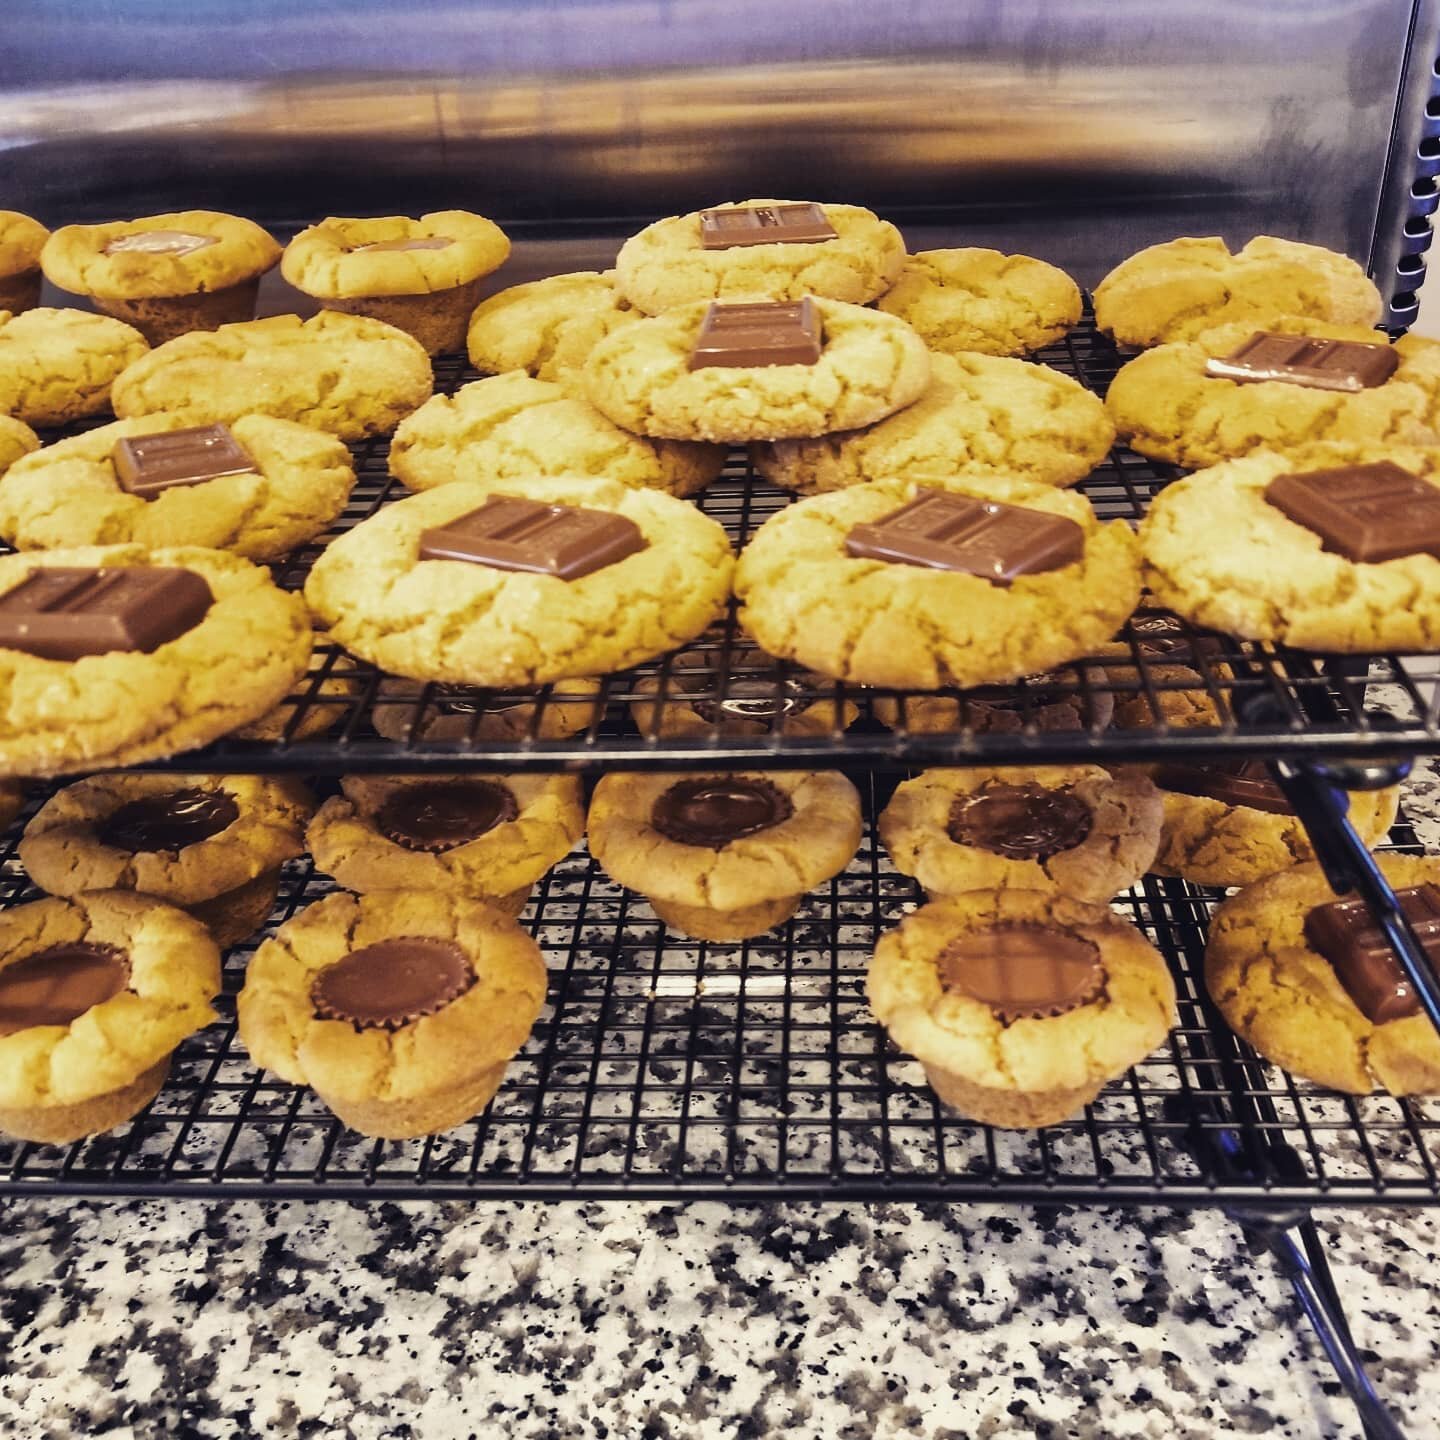 Peanut Butter Cookies and Other Blessings

Hey friends! I posted a new blog on my website about the miracles of God and peanut butter cookies. Our favorite recipe is included if you're craving something sweet 😉

#recipes
#baking
#peanutbuttercookies